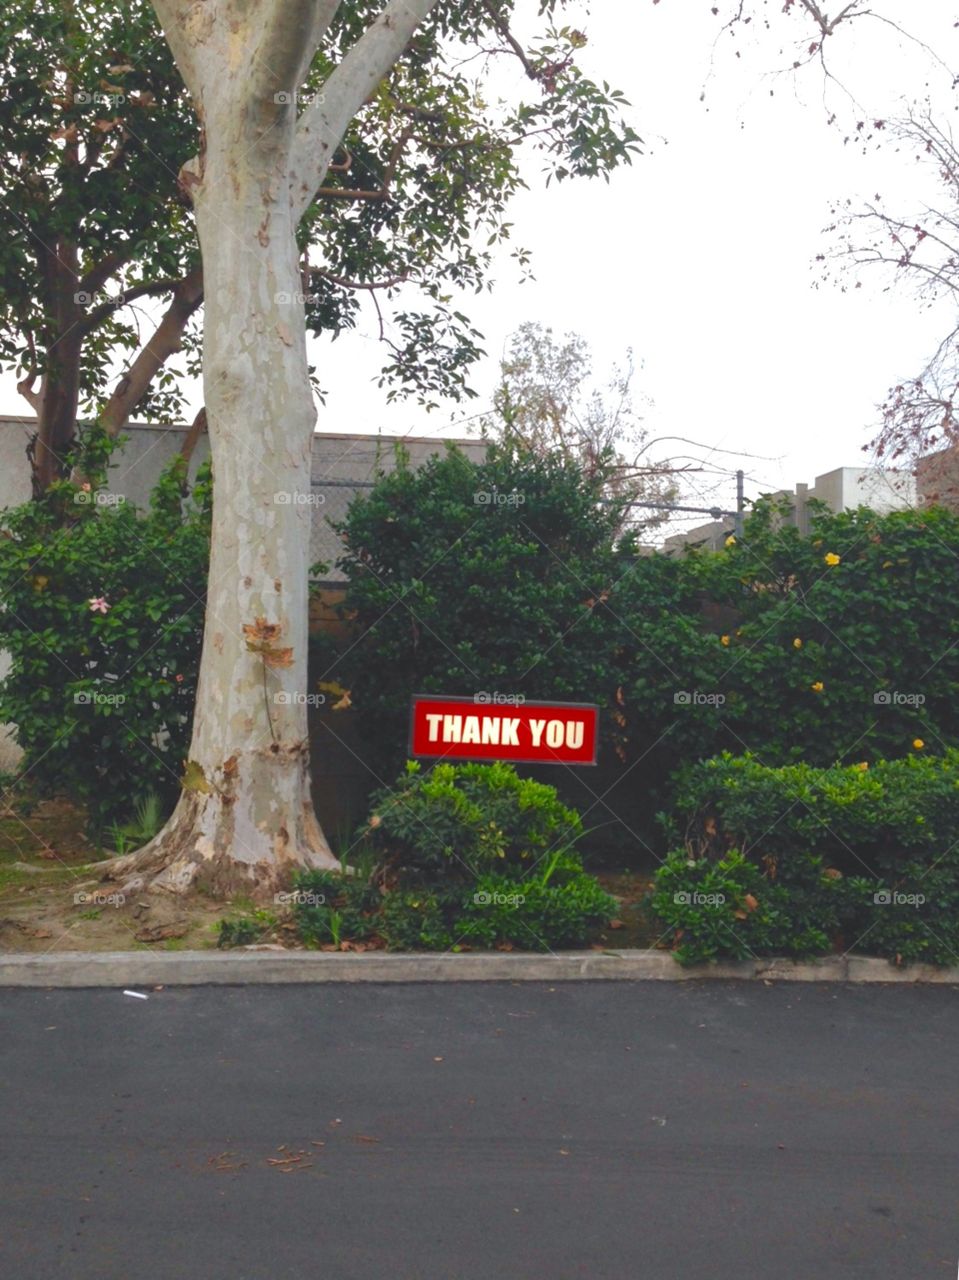 Thank You Sign

Published by:
HappyBrownMonkey 